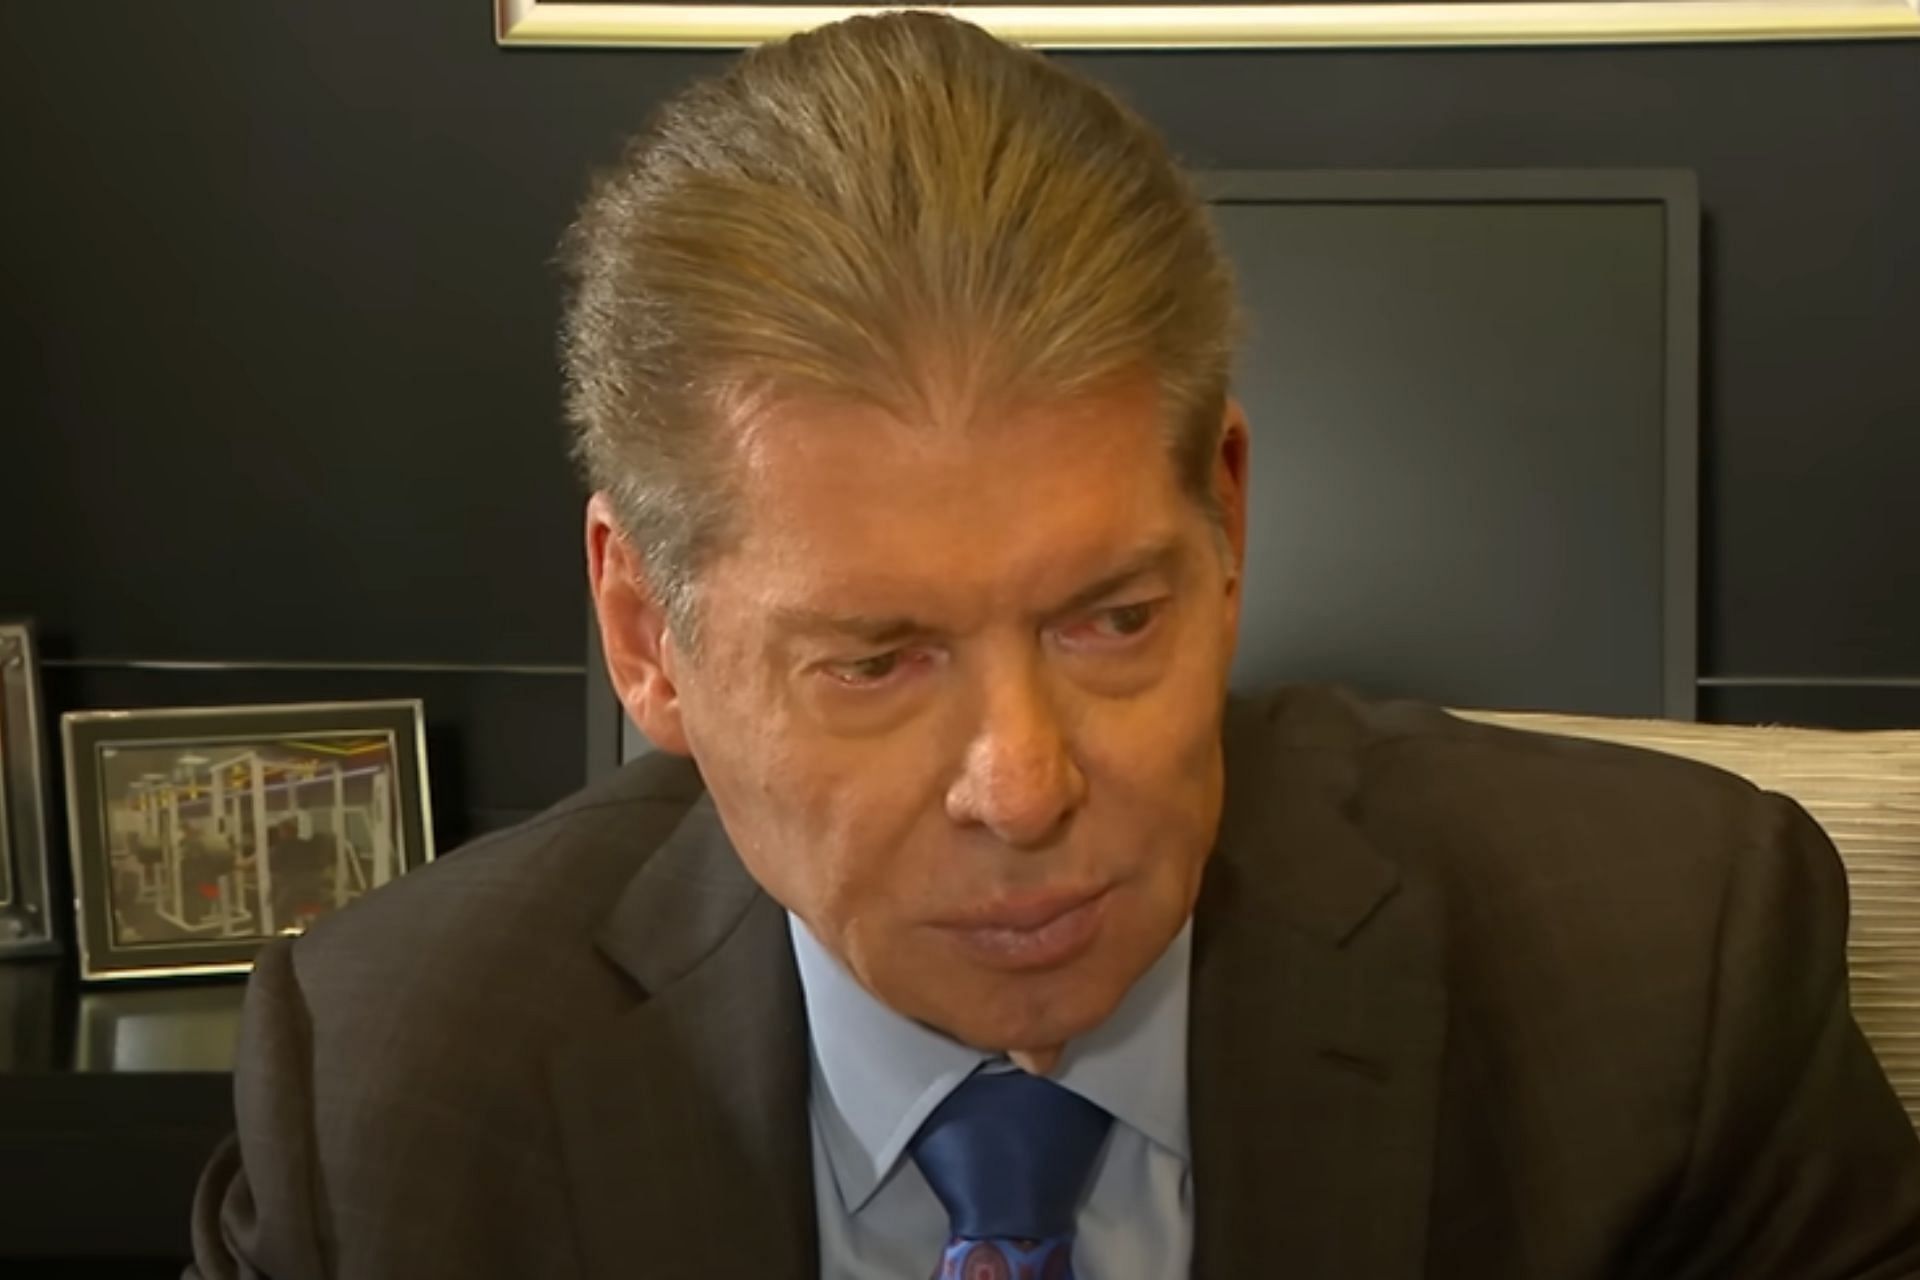 WWE Legend talks about Vince McMahon returning to wrestling